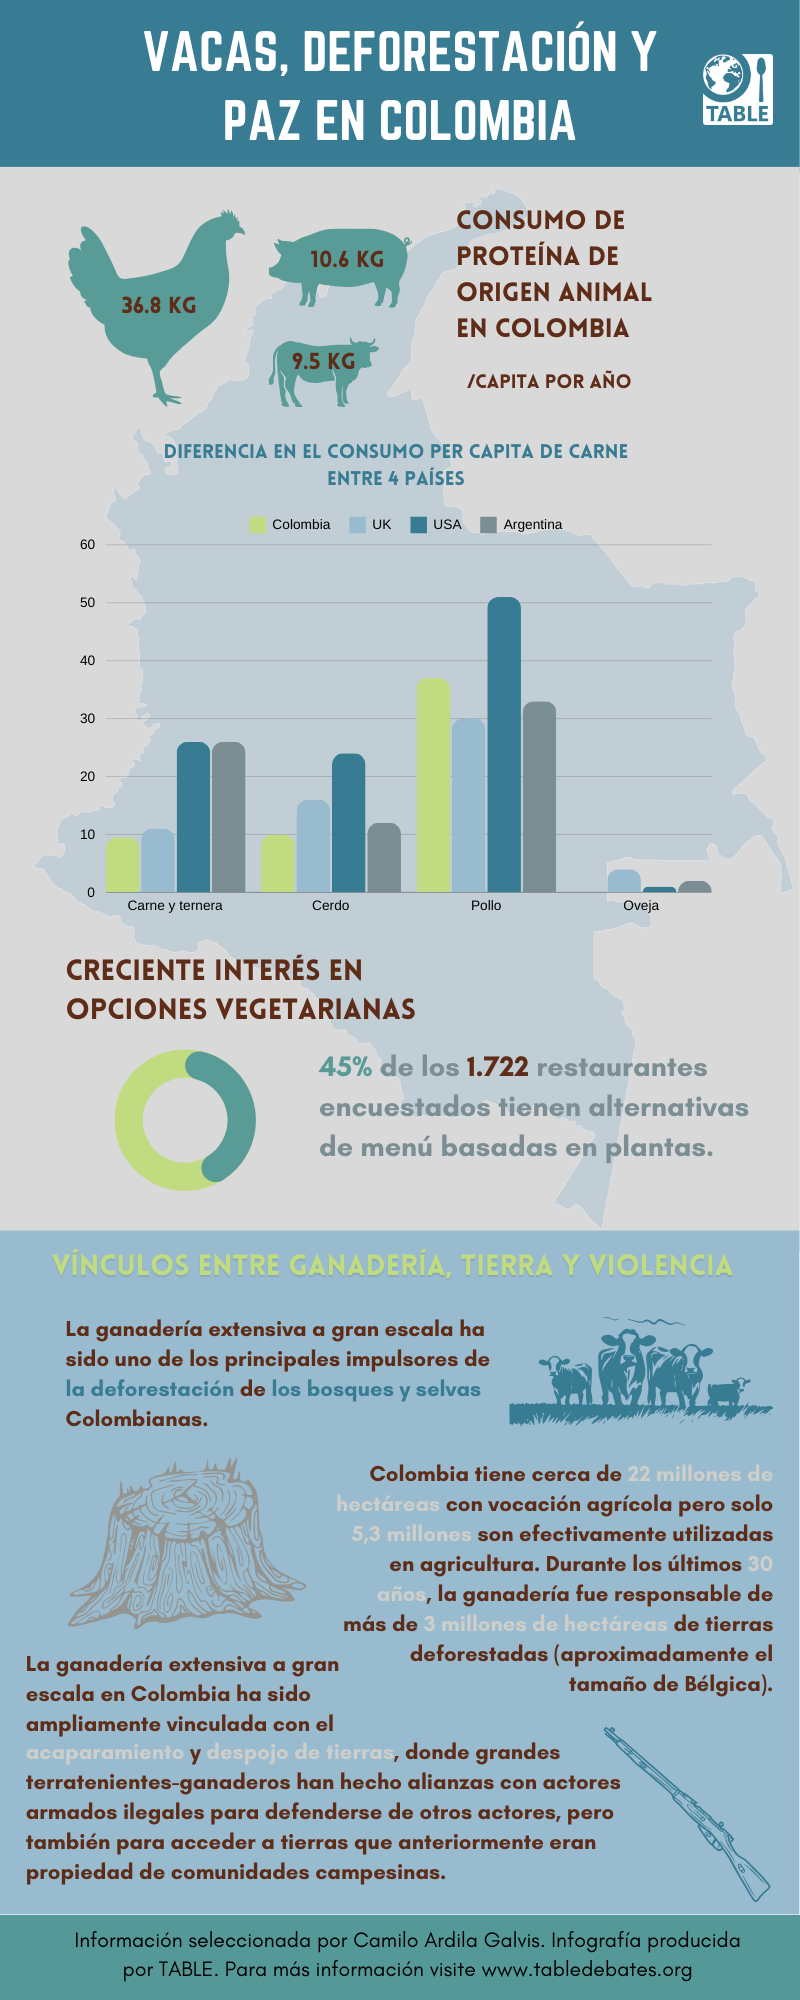 Spanish verion -infographic about Cows, deforestation and peace in Colombia